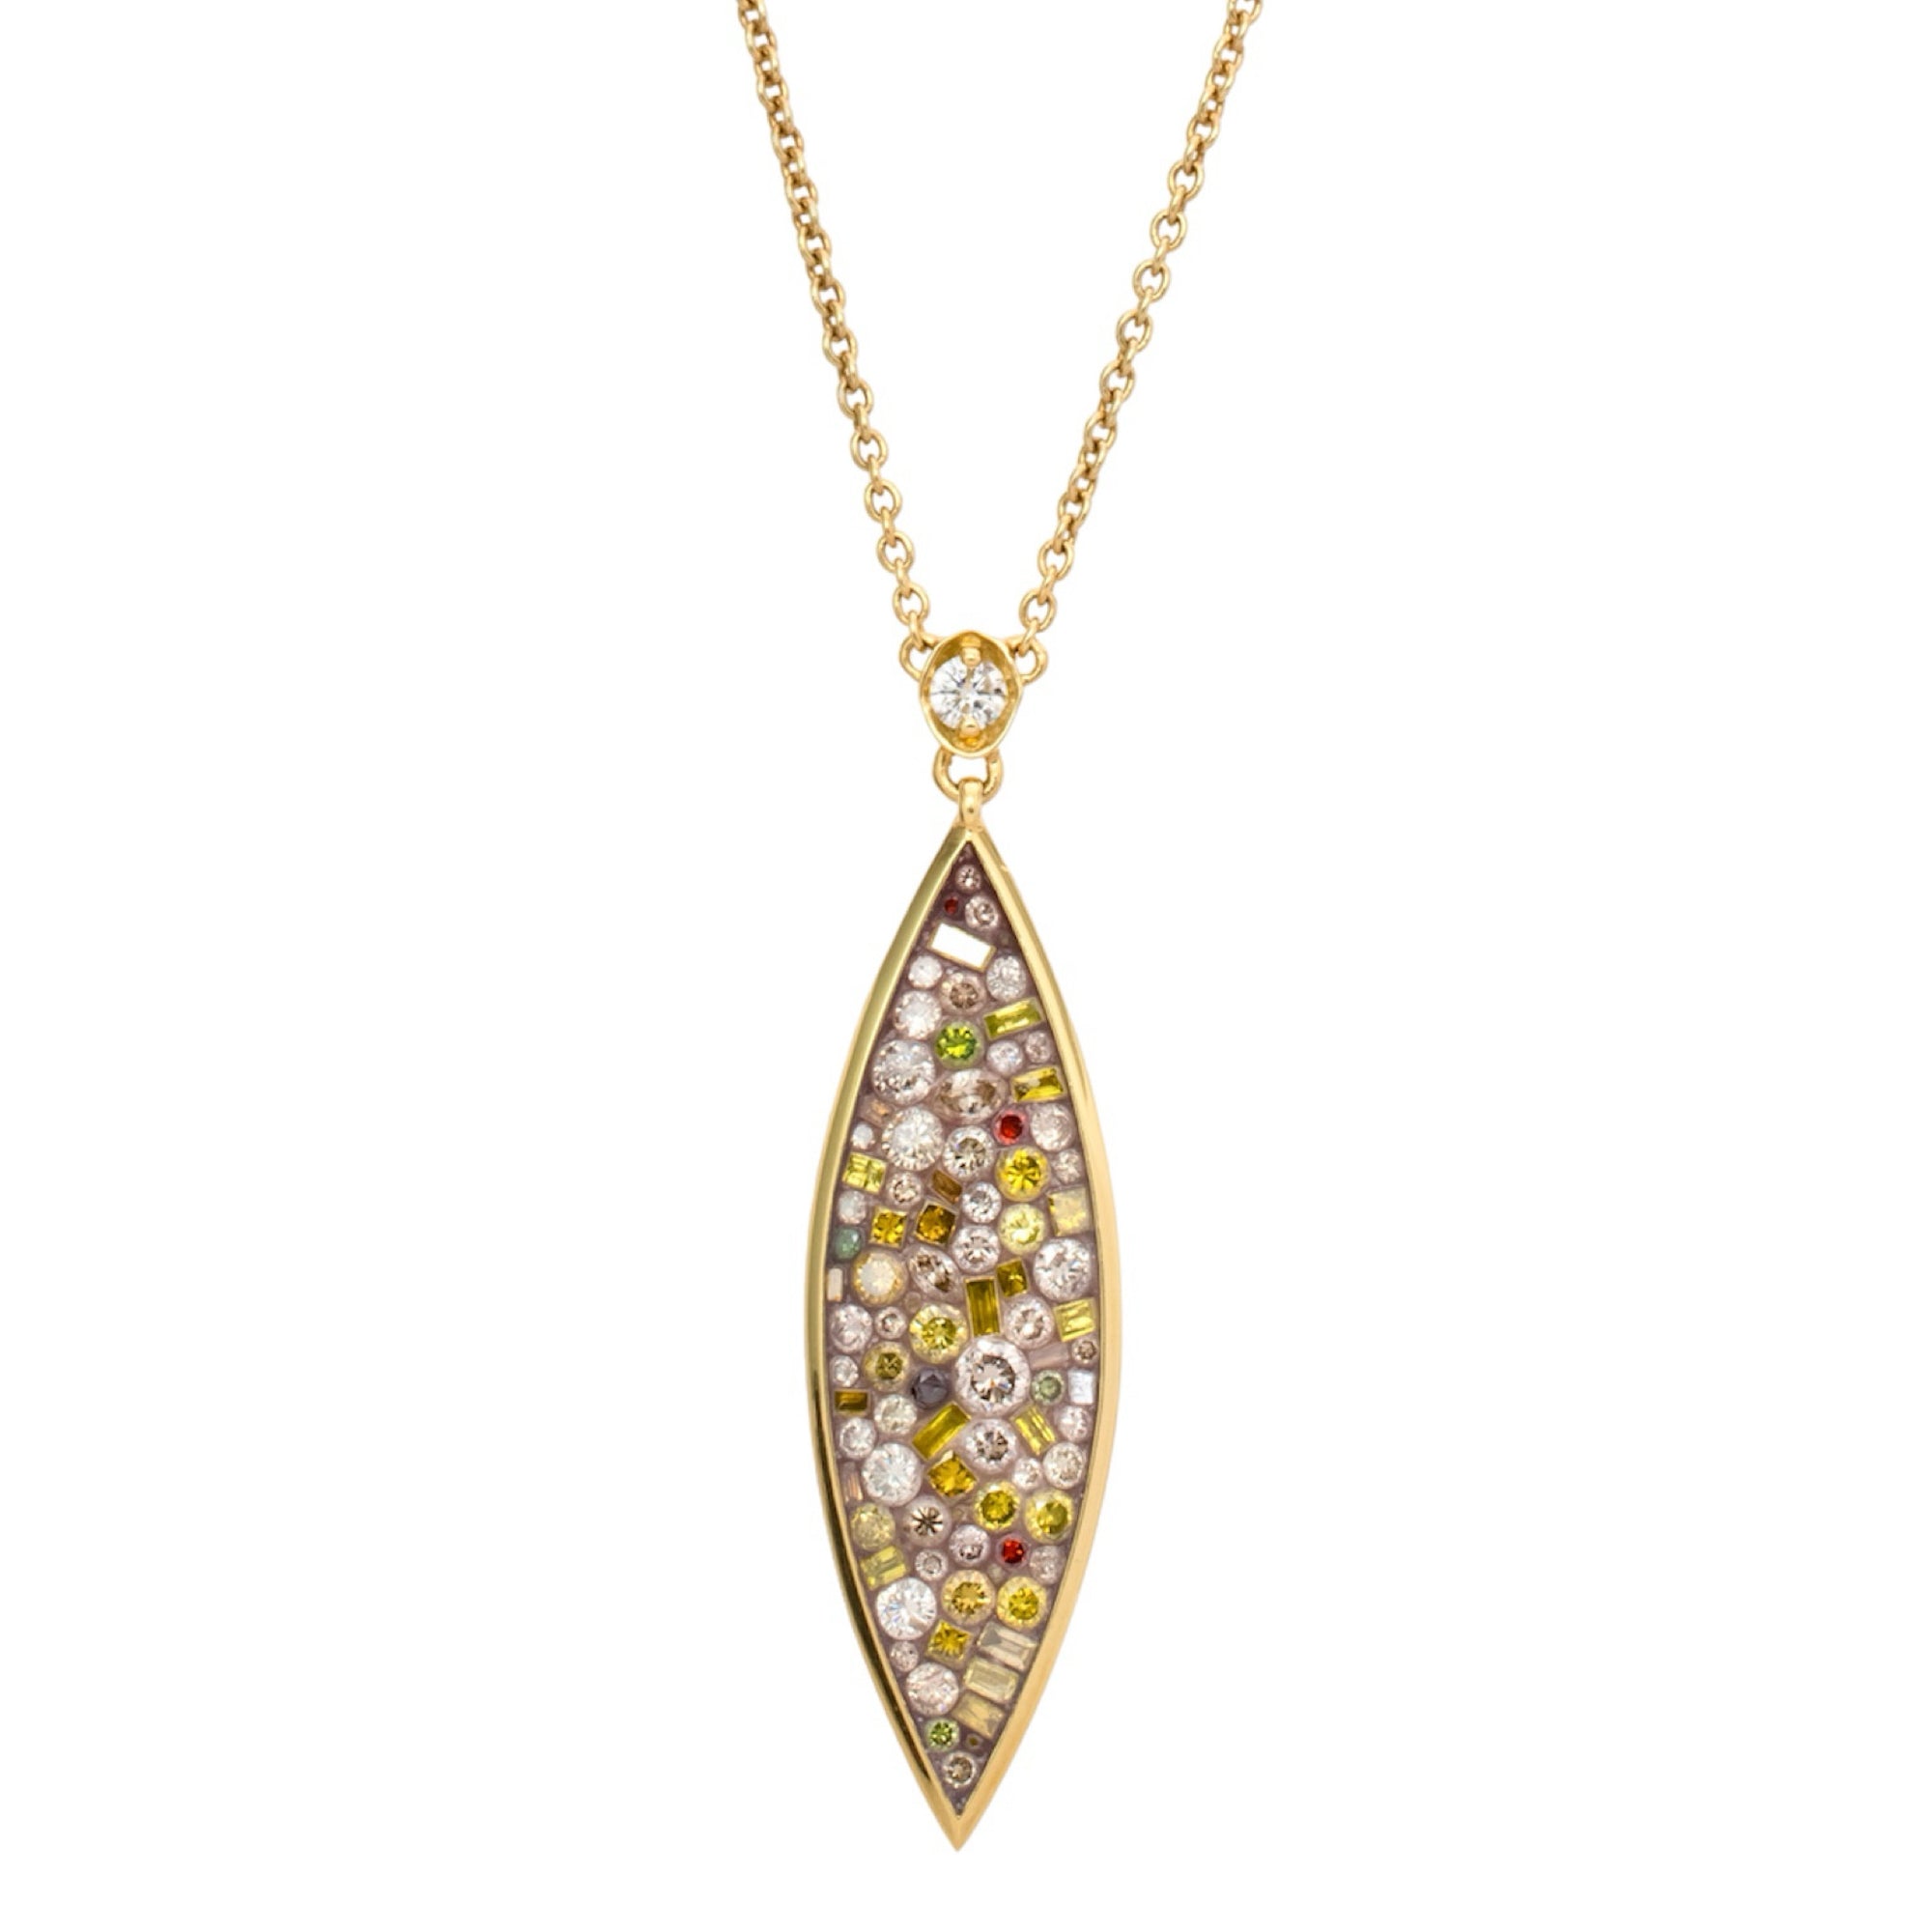 Cinnamon Marquise Diamond Necklace available at Talisman Collection Fine Jewelers in El Dorado Hills, CA and online. Specs: 12.20 cts color enhanced diamonds, 18k yellow gold 